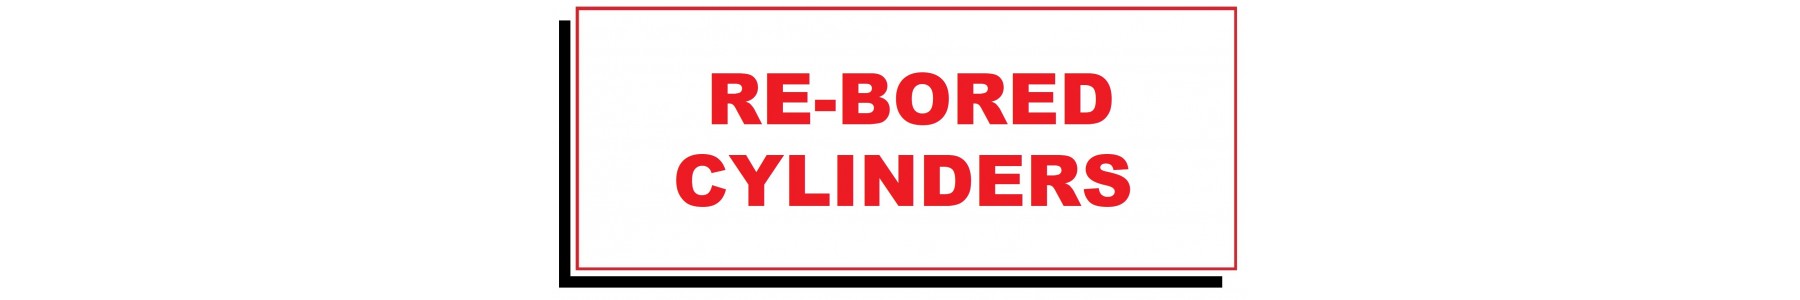 BORED CYLINDERS